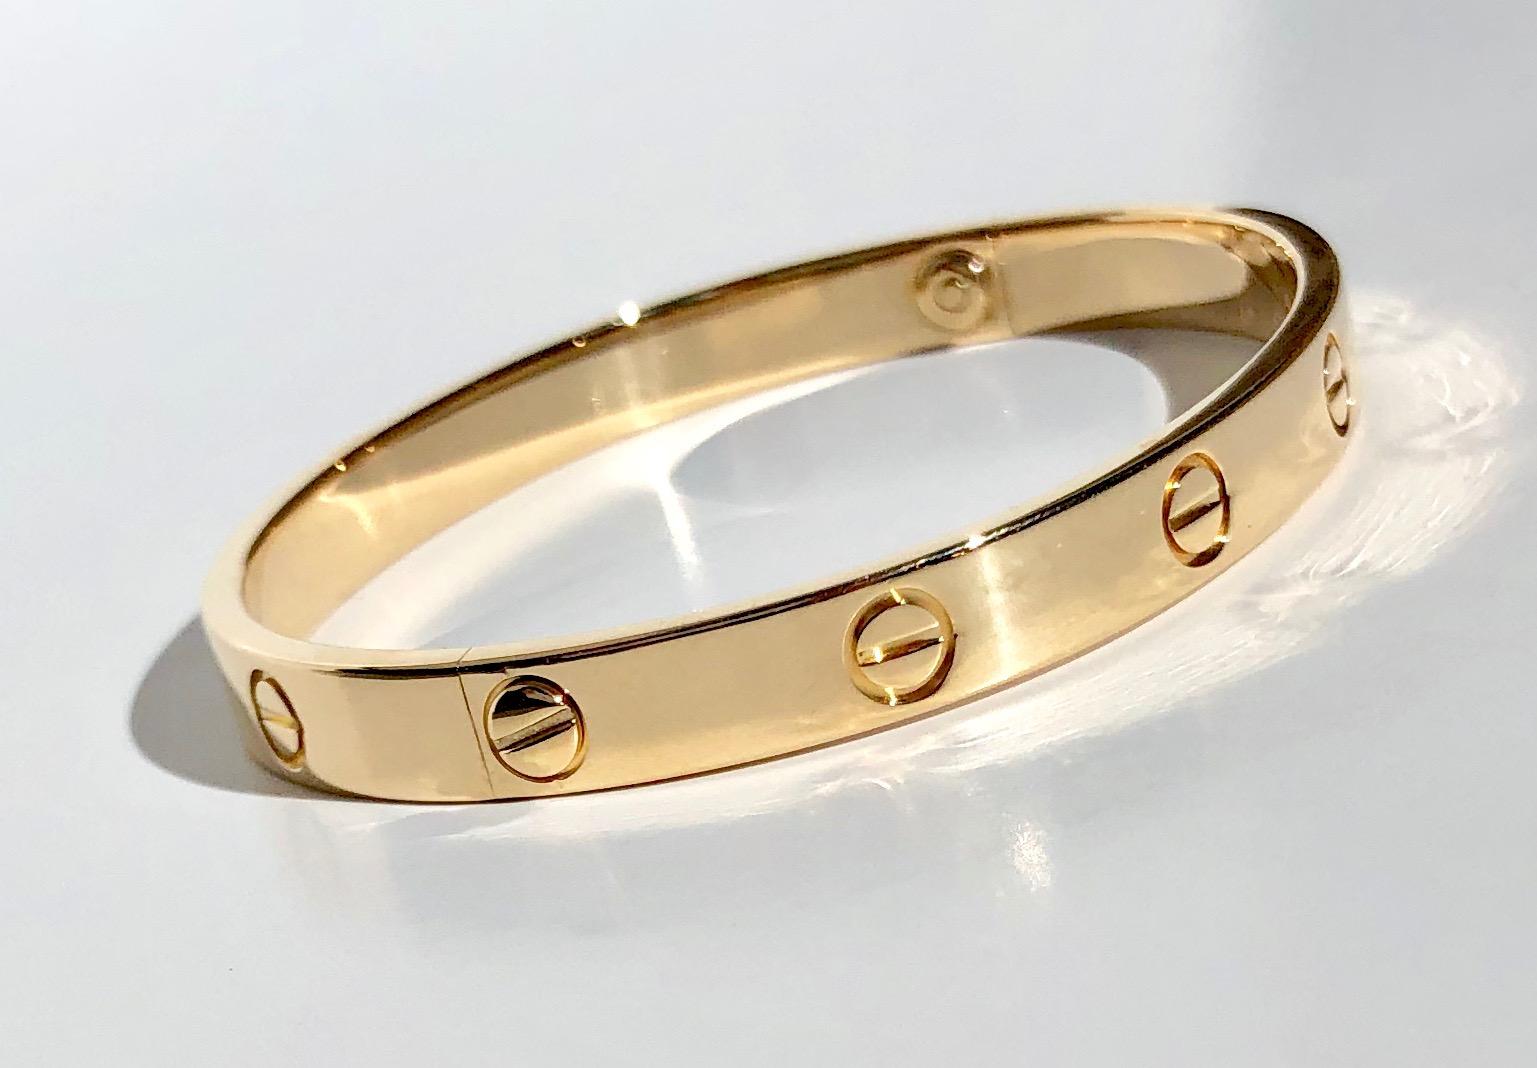 Cartier 18k Yellow Gold Love Bracelet, with Box/Papers 1